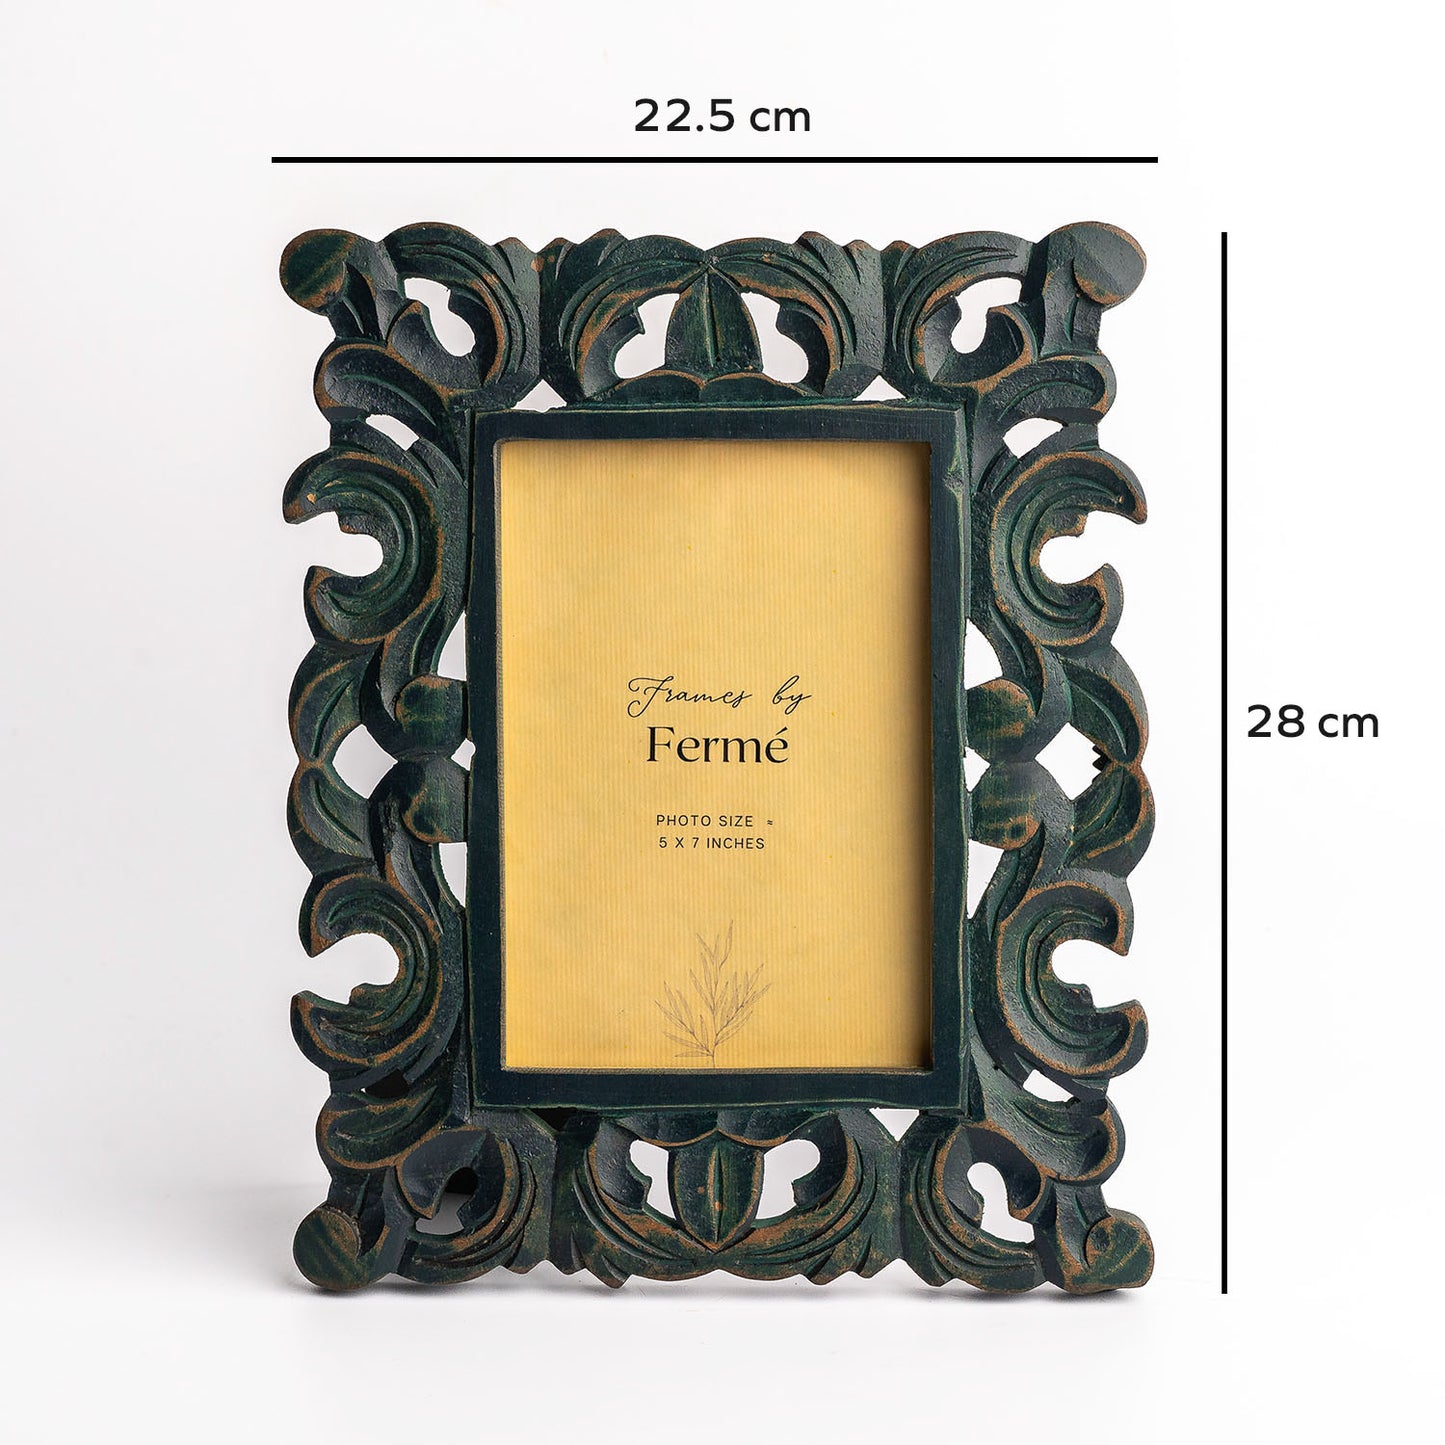 Ferme Vintage Rustic Wooden Photo Frame Hand Carved Dark Green FPF149 - 5x7 inches